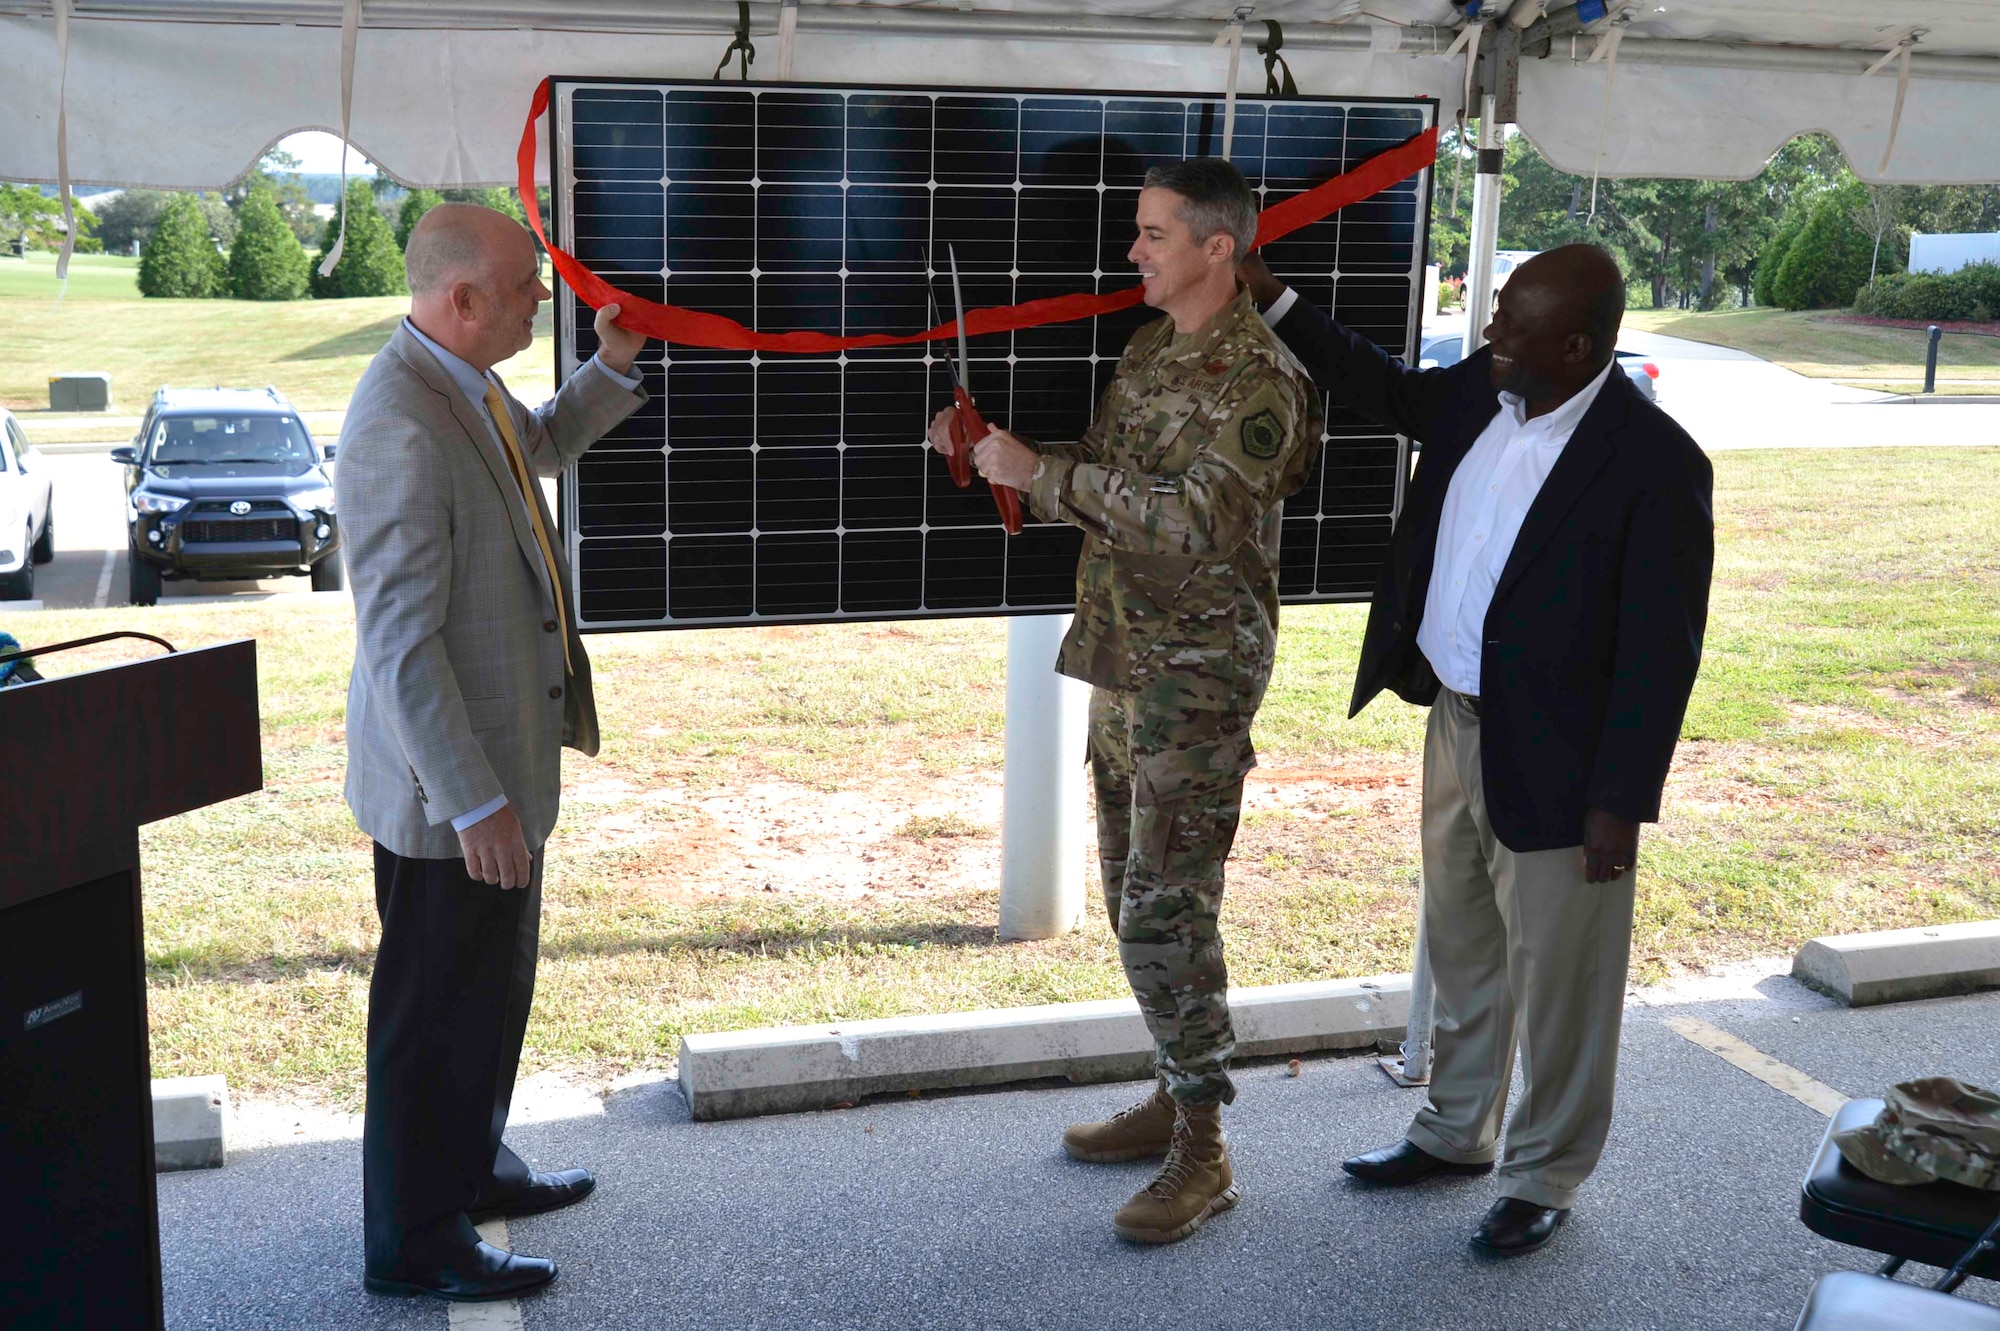 The project included the installation of 5,865 solar panels in 284 homes, accumulating an approximate 40 percent offset of total annual electrical consumption. A first for military housing in the state of South Carolina, the project solidifies the state as eighth in the nation for installed solar power capacity.